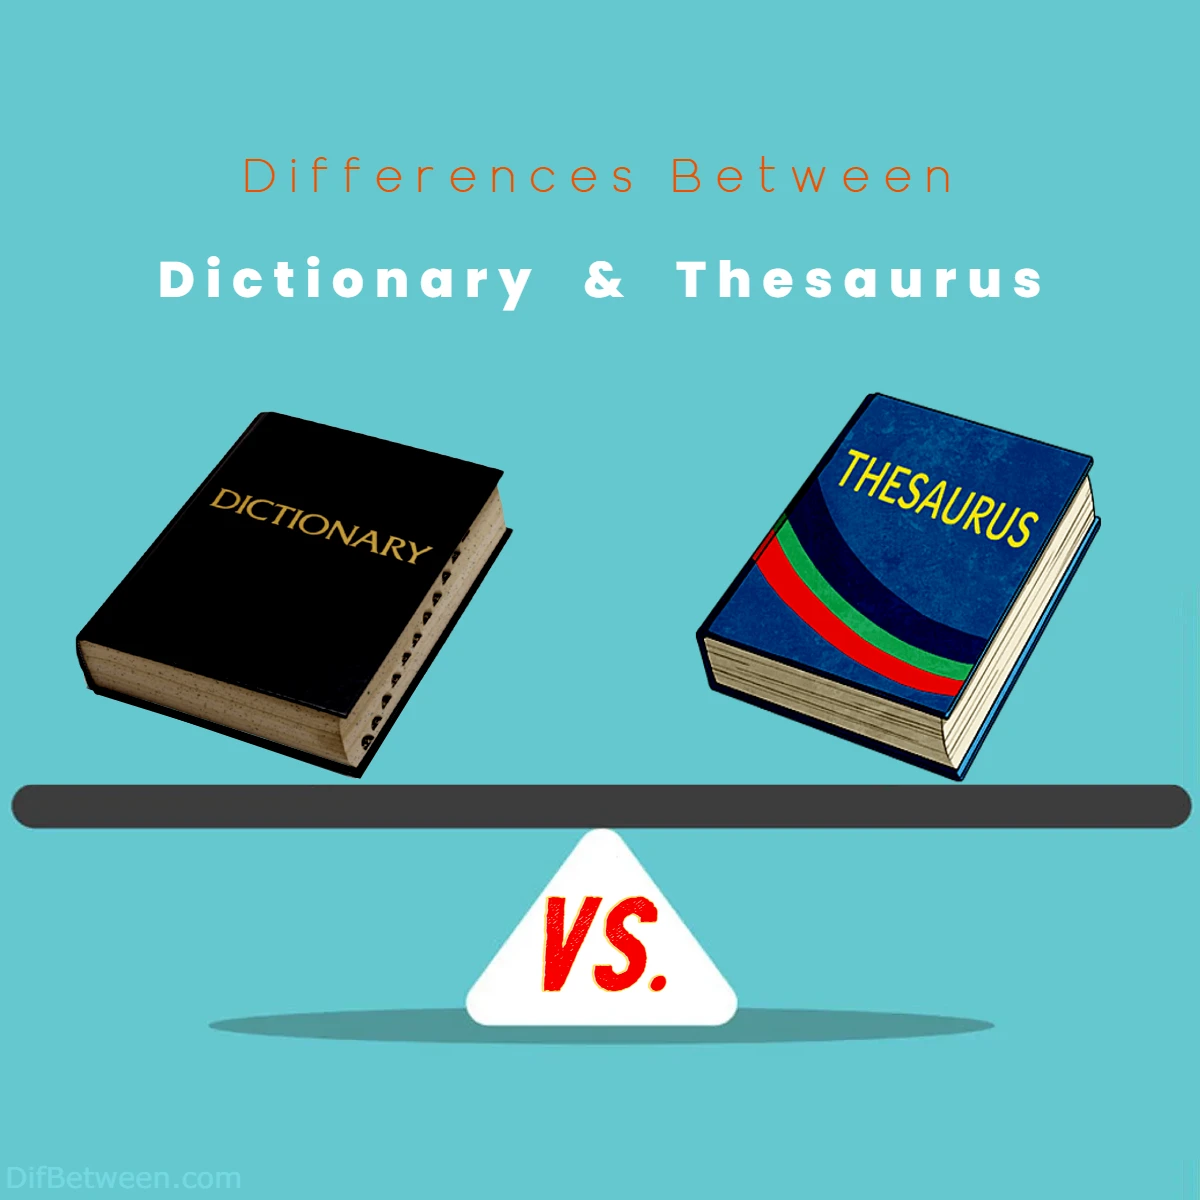 Differences Between Dictionary vs Thesaurus